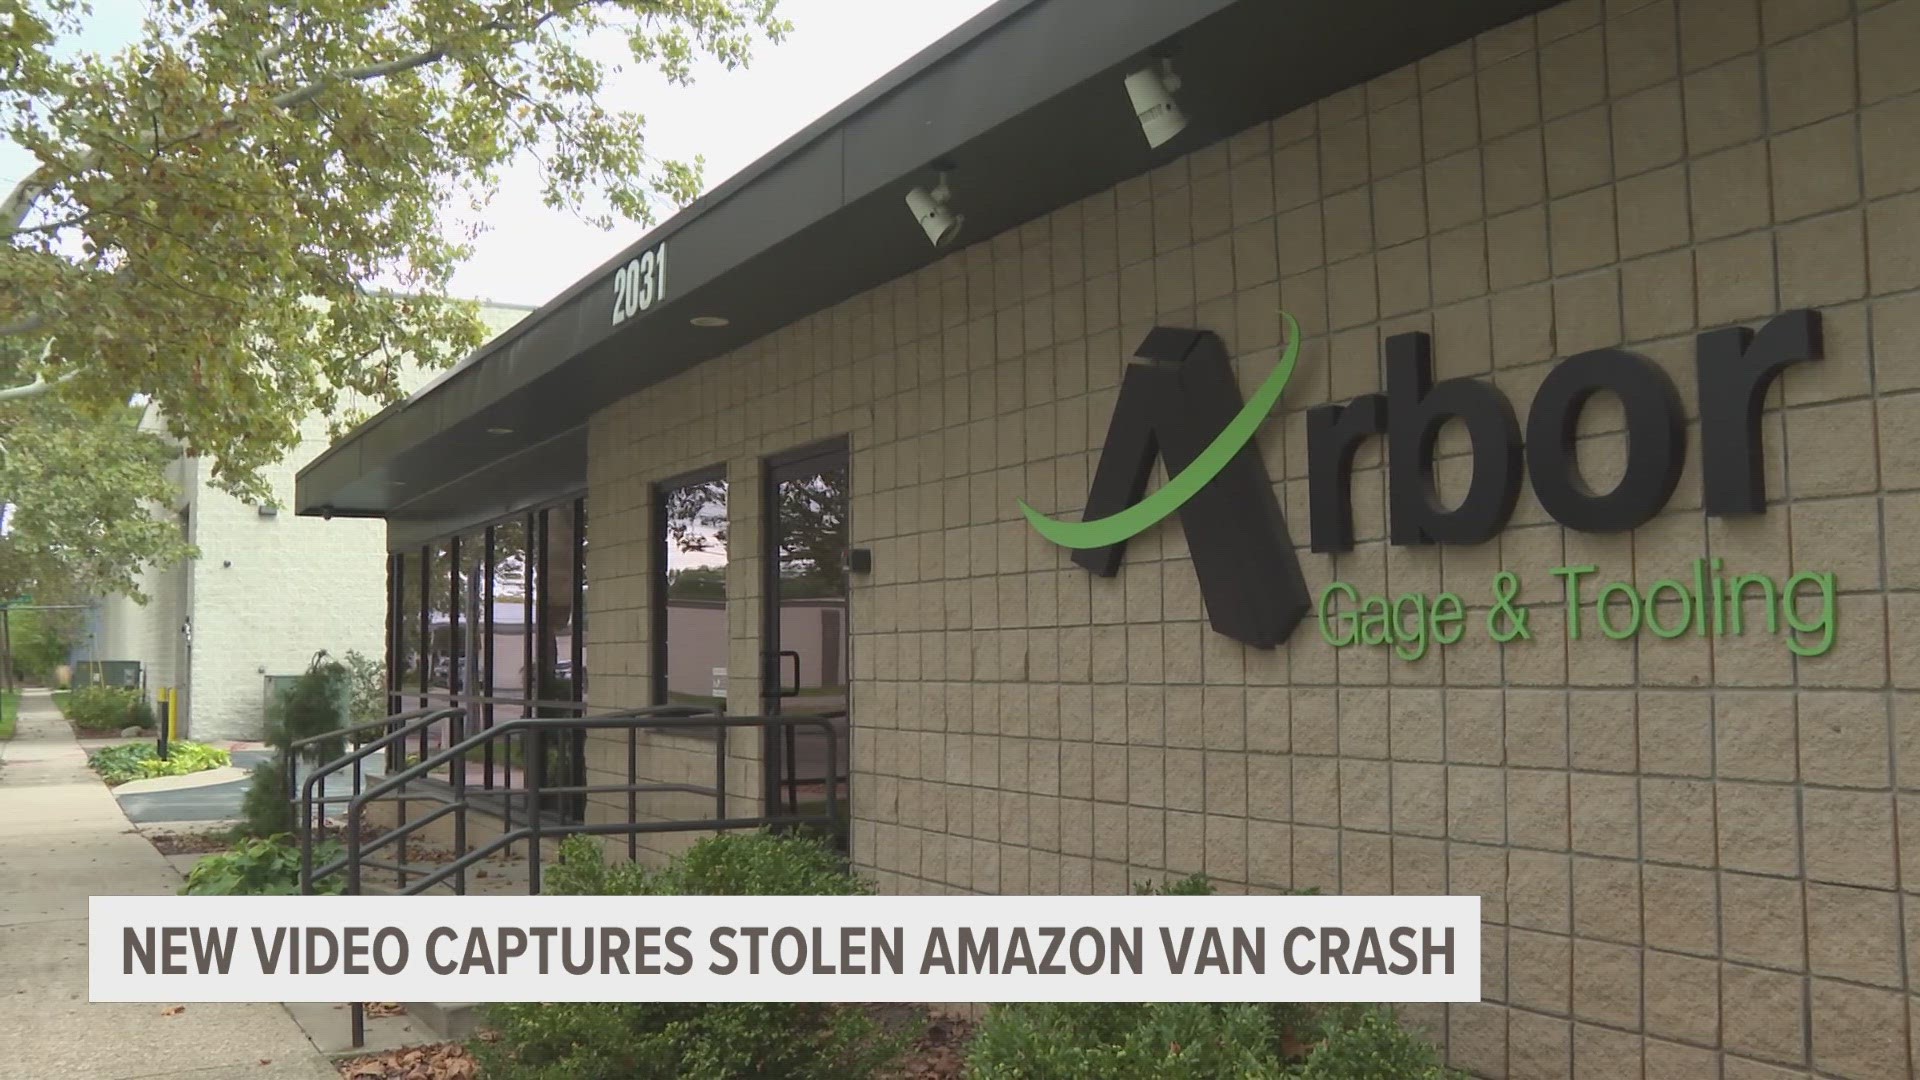 Arbor Gage and Tooling in Grand Rapids security footage shows stolen Amazon van crashing onto their property as the driver is flung from the vehicle.